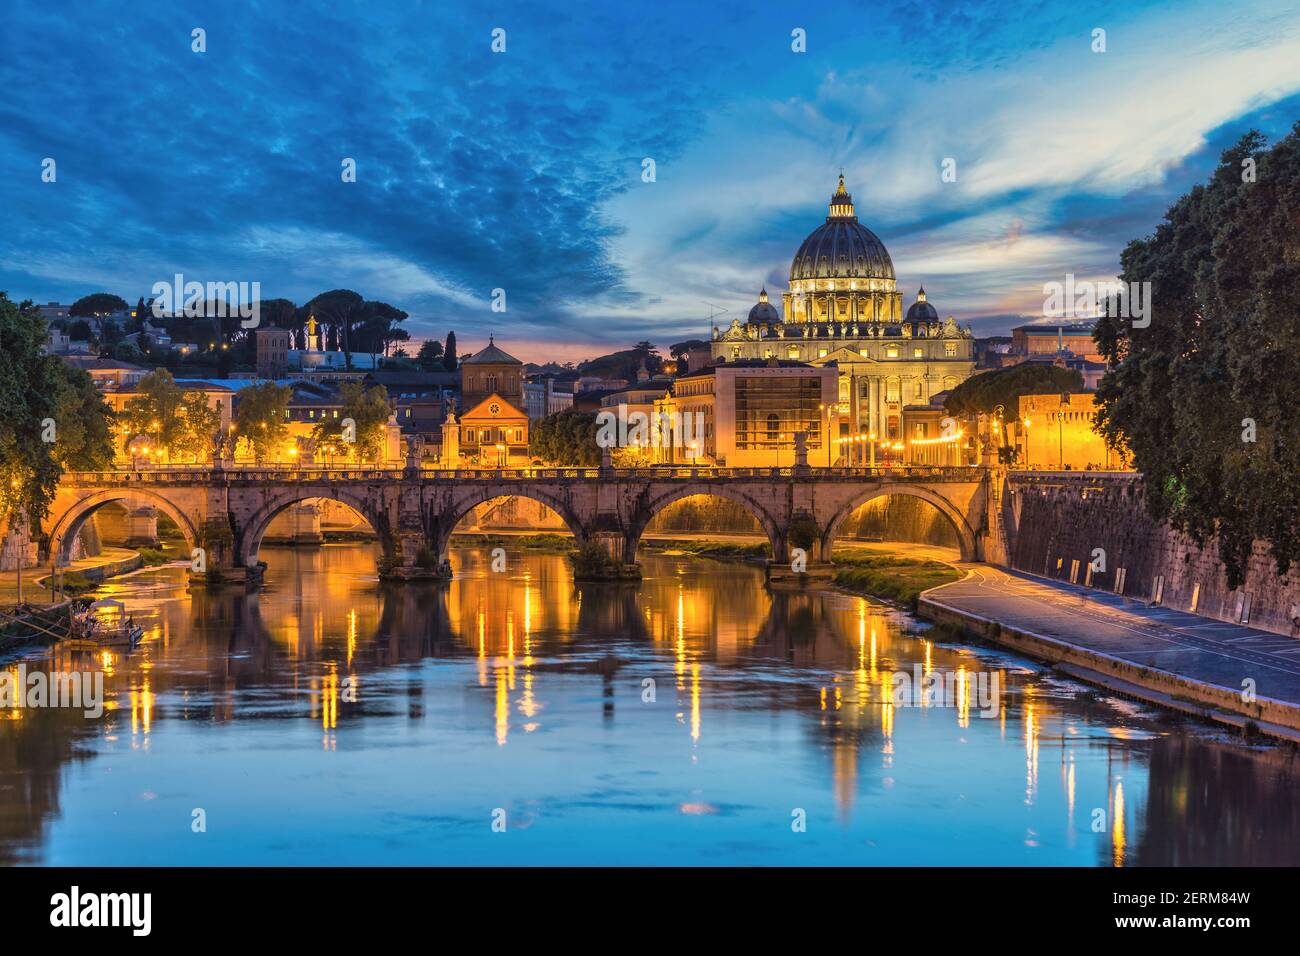 Rome Vatican Italy, sunset city skyline at St. Peter's Basilica and Tiber River Stock Photo